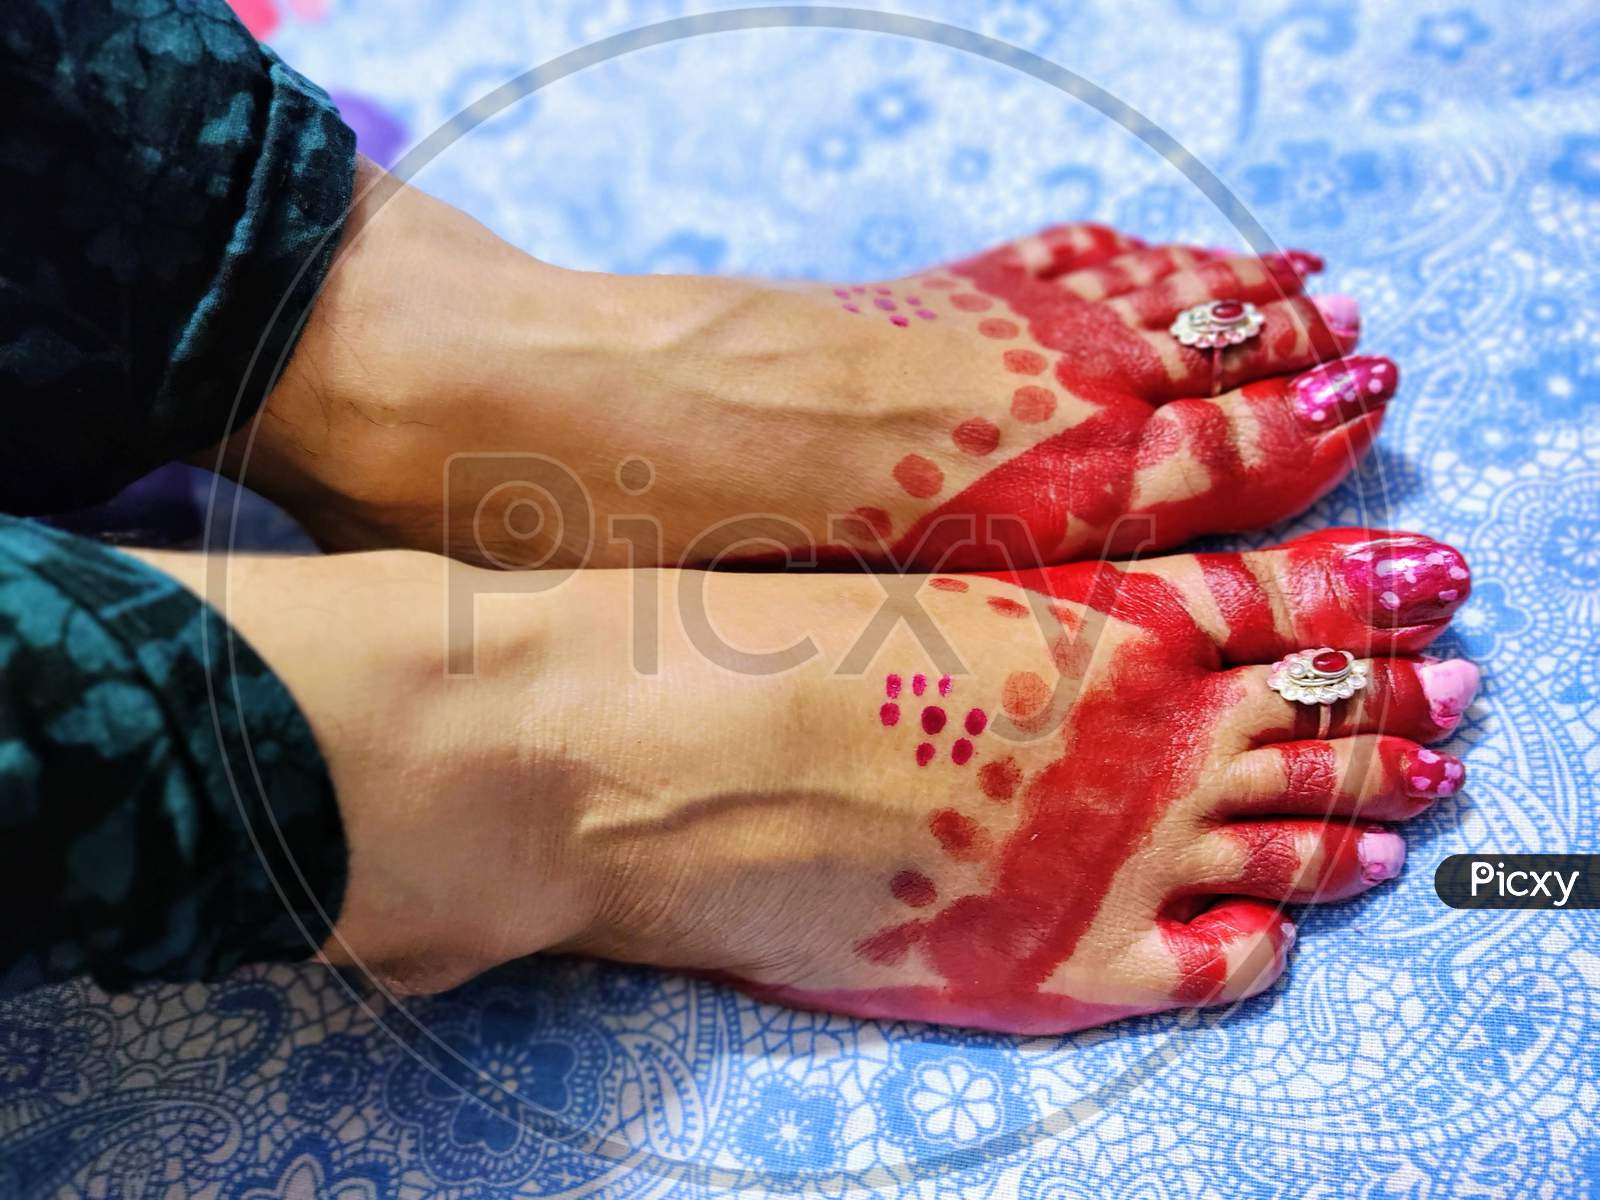 Design on Foot by an Indian Lady I Foot paint